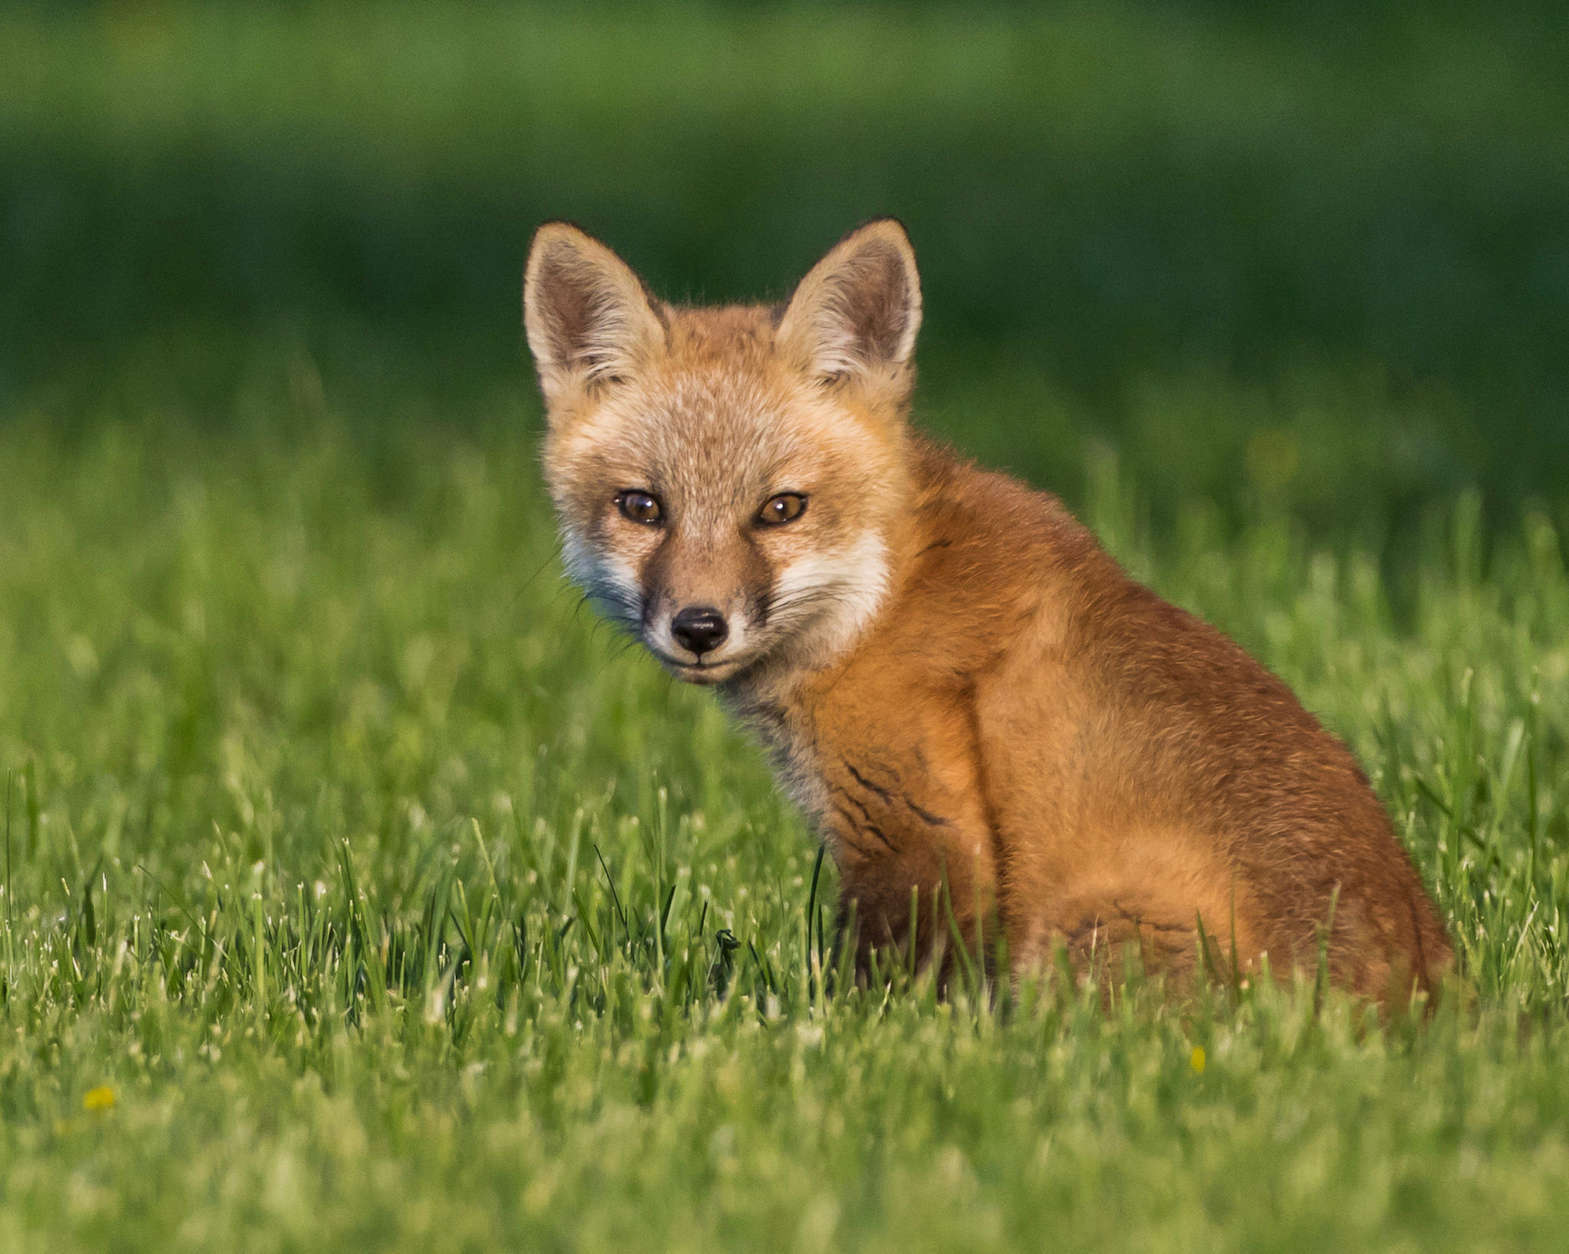 A fox pup in a field by Dane Madsen. (Courtesy Maryland Department of Natural Resources)